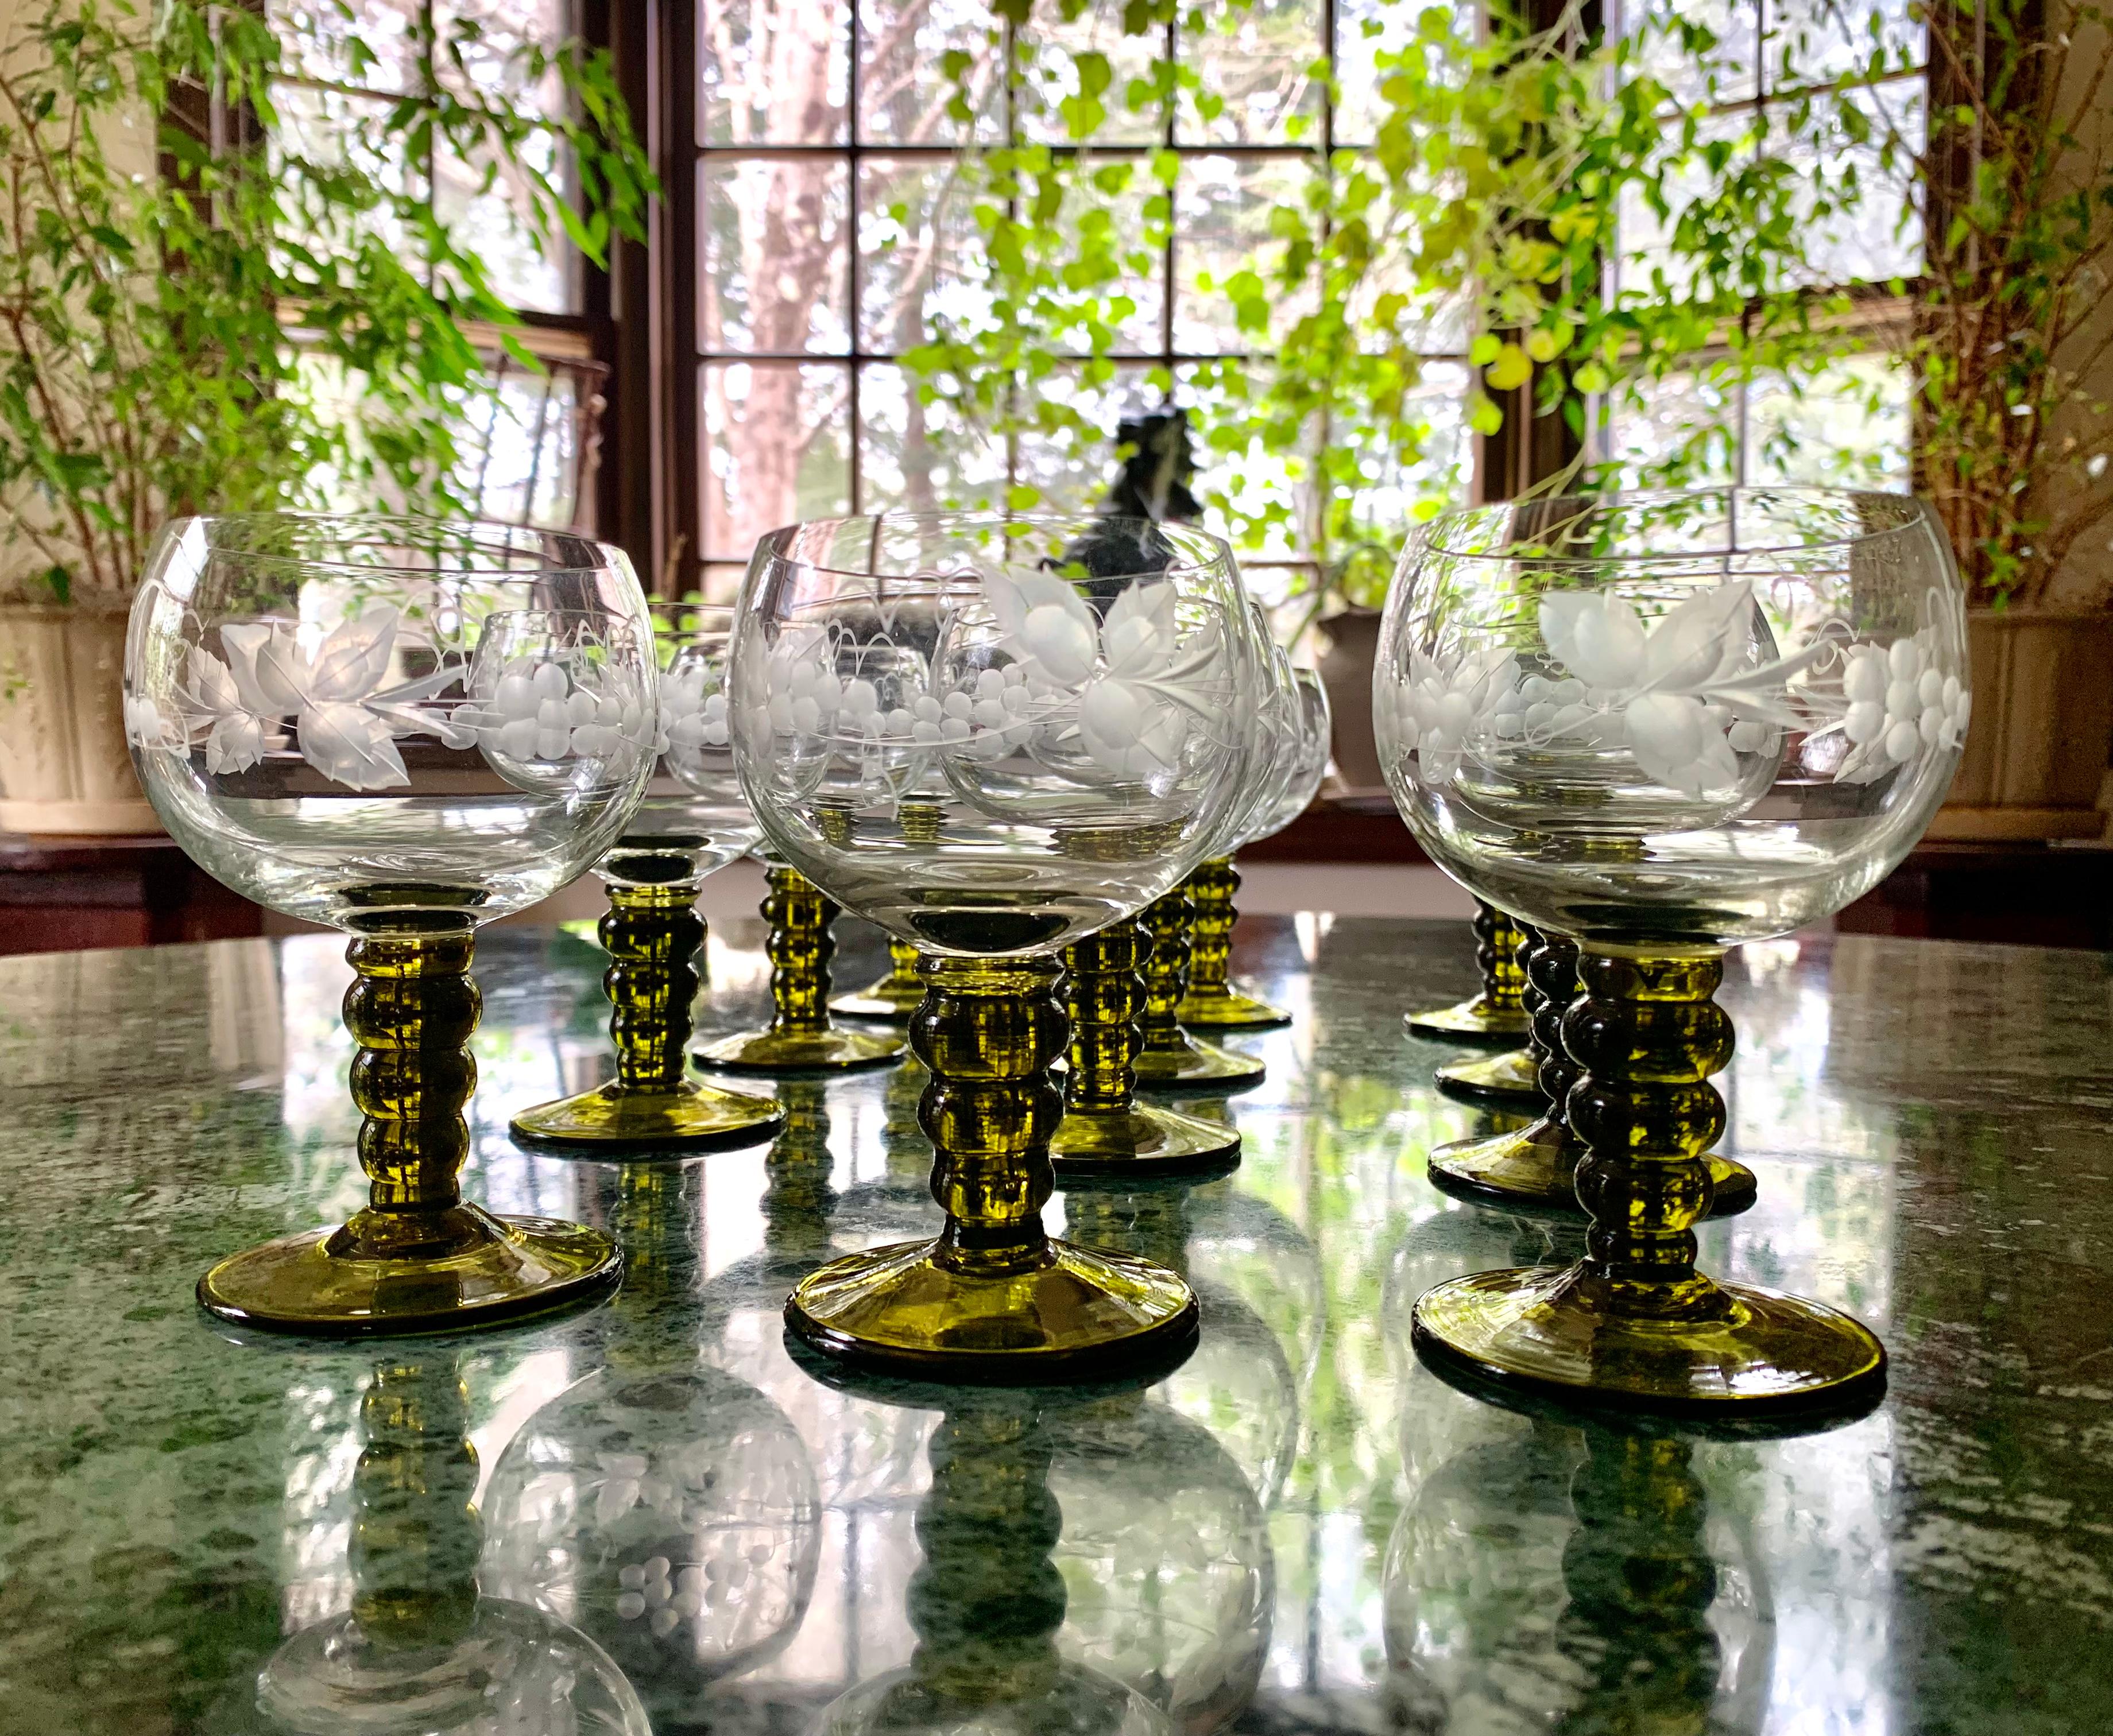 Wonderful for garden parties, this set of twelve Bohemian Rhine wine glasses features an engraved grapevine motif on the body of the glass and green stem. Several glasses have an engraved fleur-de-lis mark on the bases.
All pieces in excellent